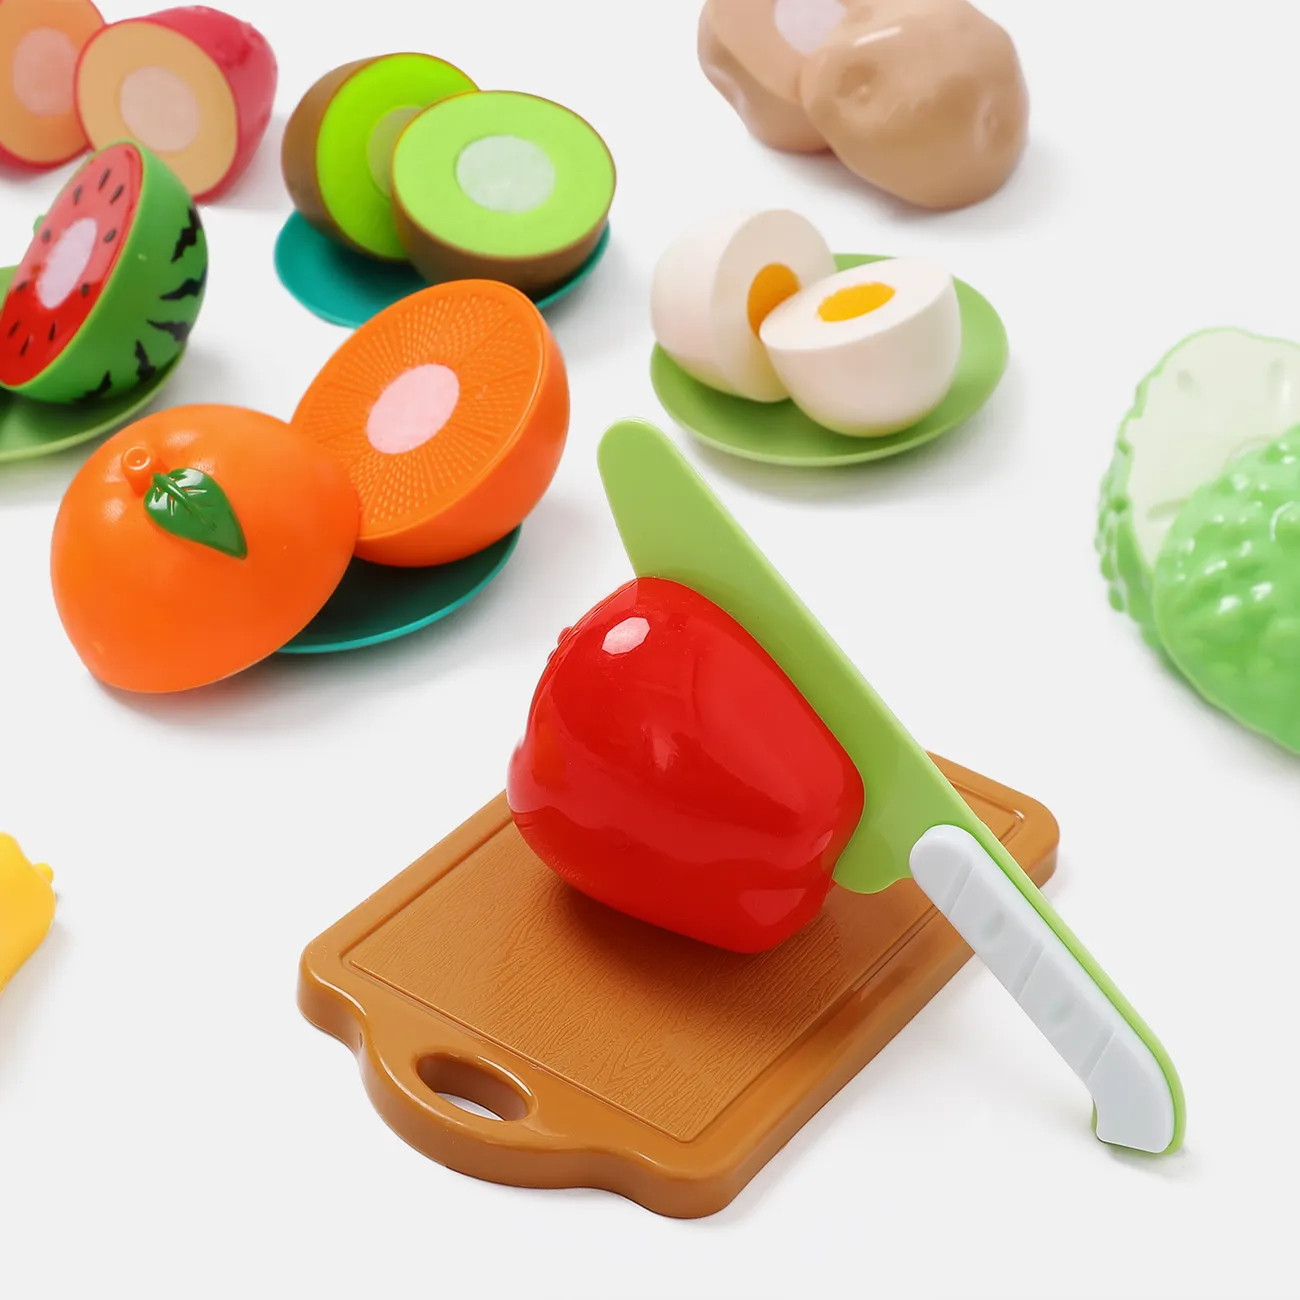 16Pcs BPA Free Plastic Cutting Play Food Toy Kids Cuttable Fruits Vegetables Set with Knives & Cutting Board & Plates (Knife Color Random) Color-A big image 1